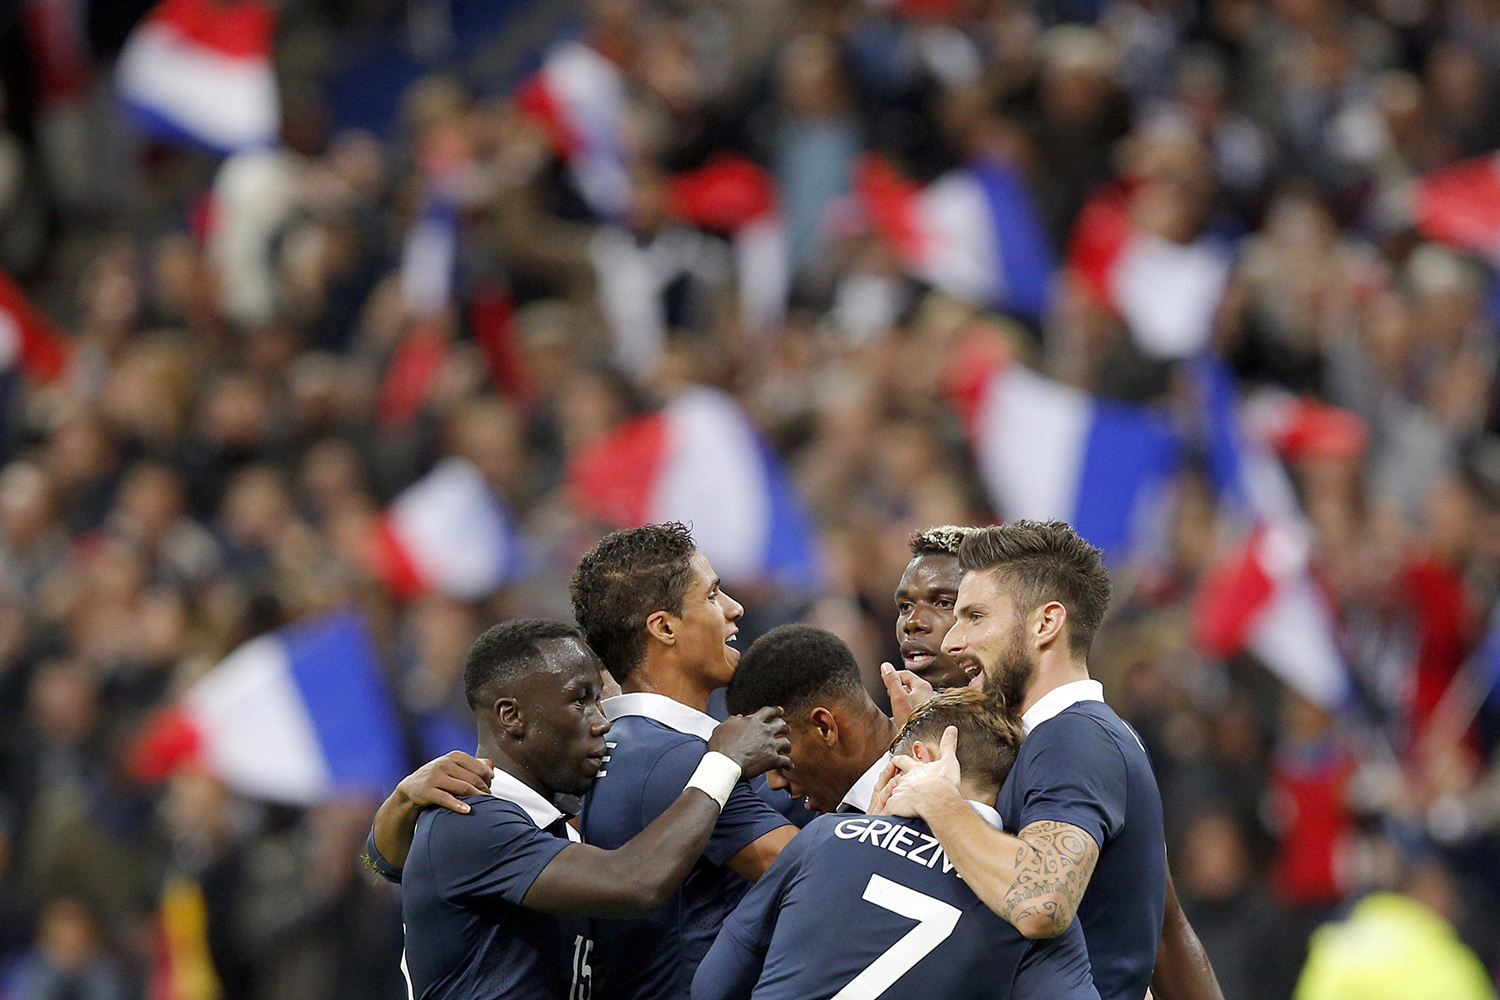 France will play friendly against England after Paris attacks